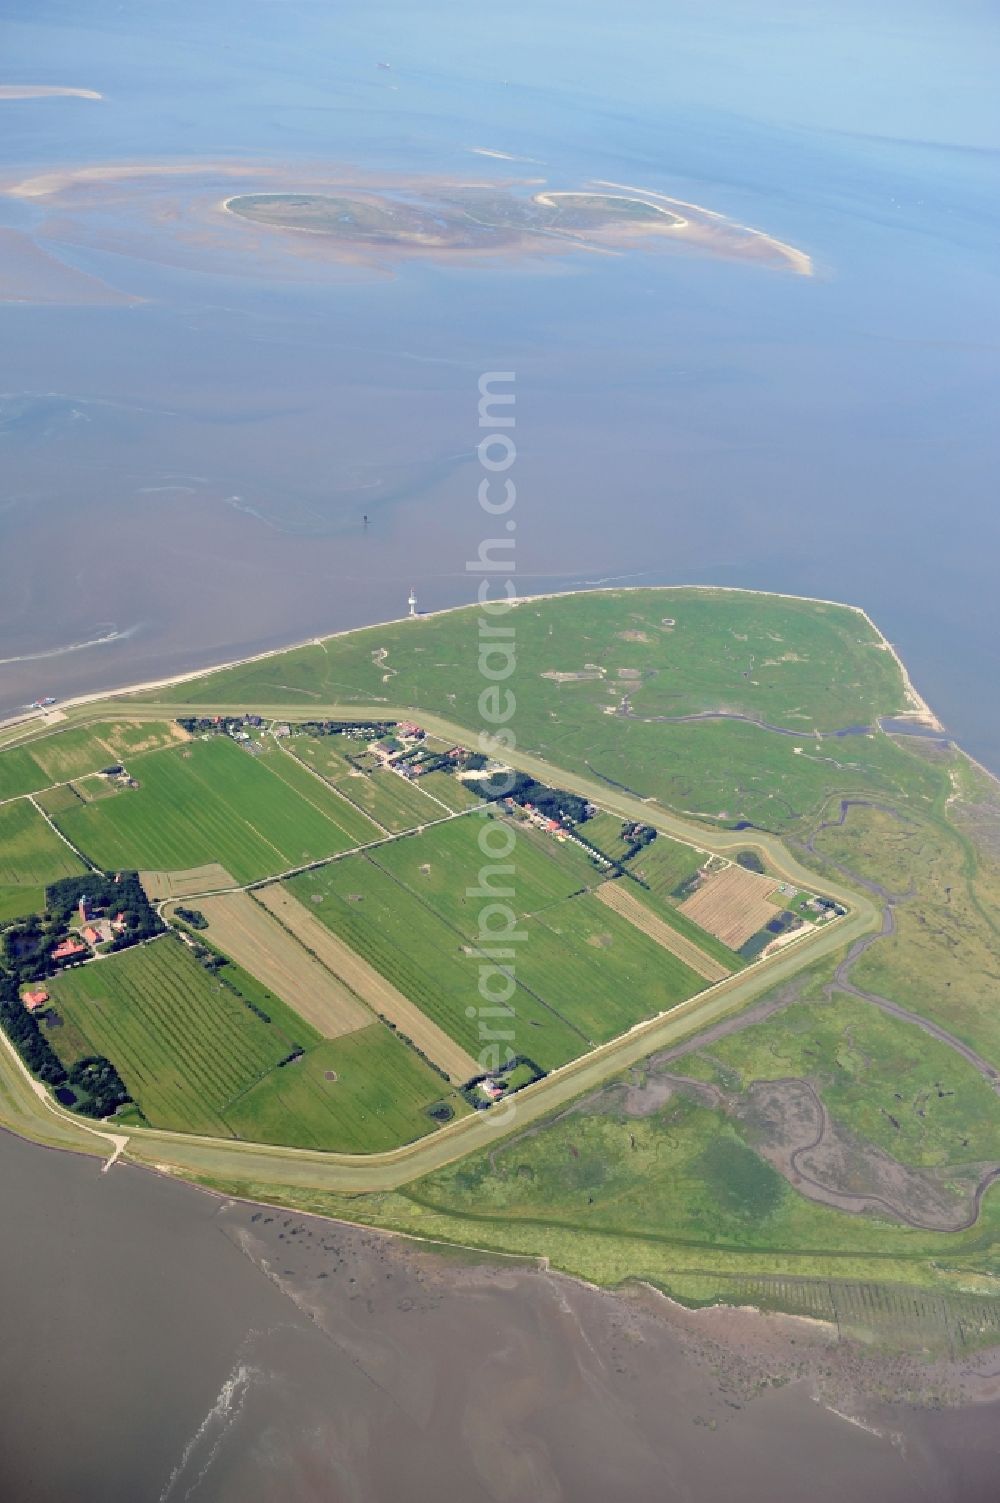 Neuwerk (Insel) from above - View of the North Sea island Neuwerk, which ist a province of Hamburg. The inhabited island whose only source of income today is tourism